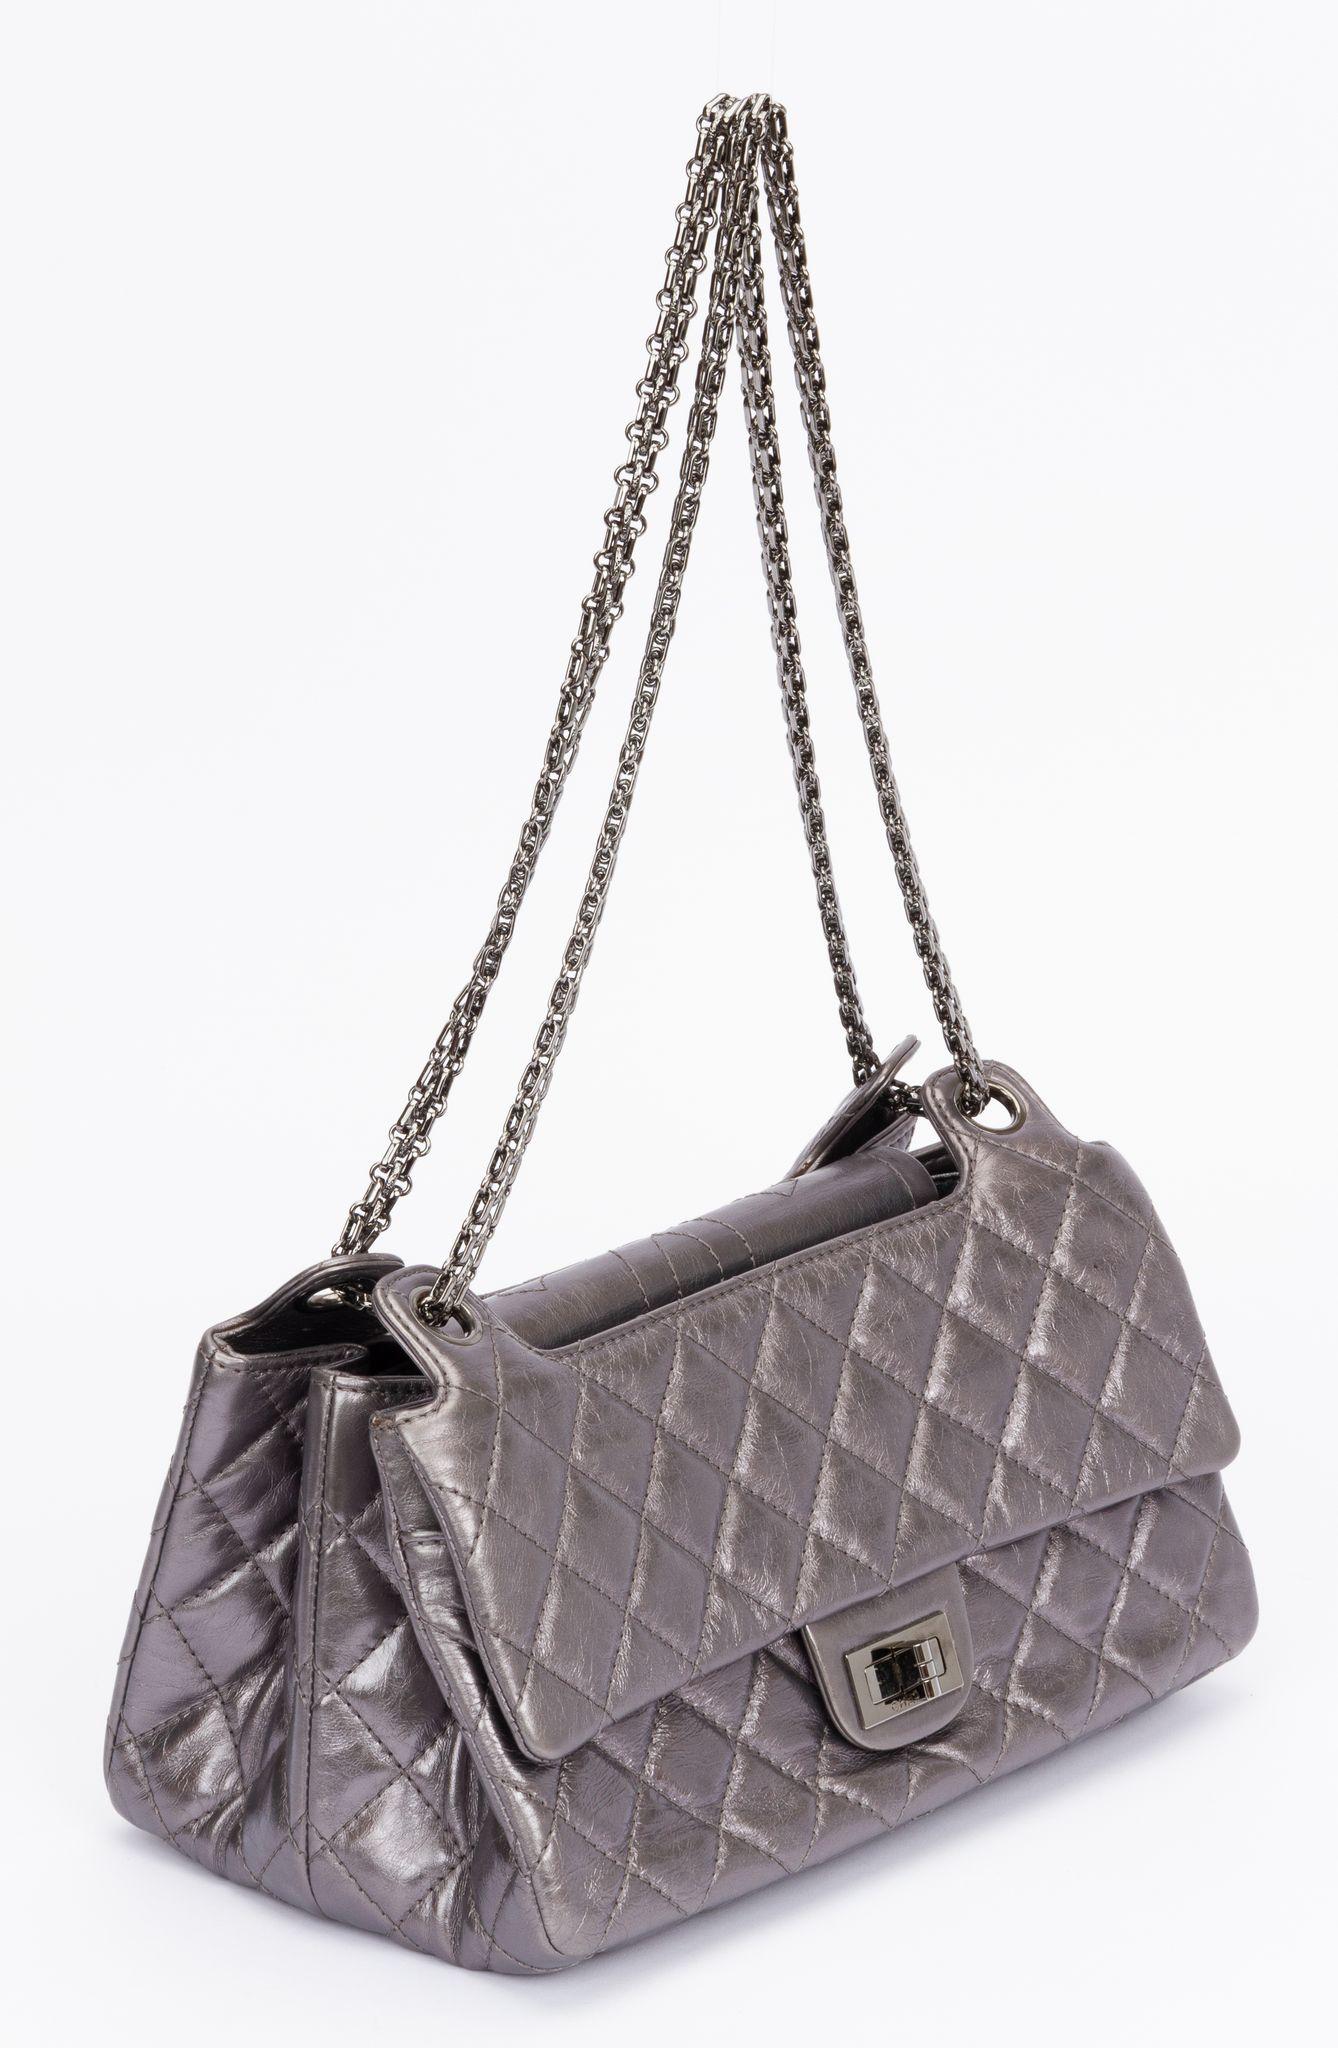 Chanel Reissue Medium Flap bag. The shoulder bag is crafted of quilted calfskin leather in a silver metallic tone. The clasp for closing the back is made of silver hardware and ti be twisted to lock the bag. The chain (11